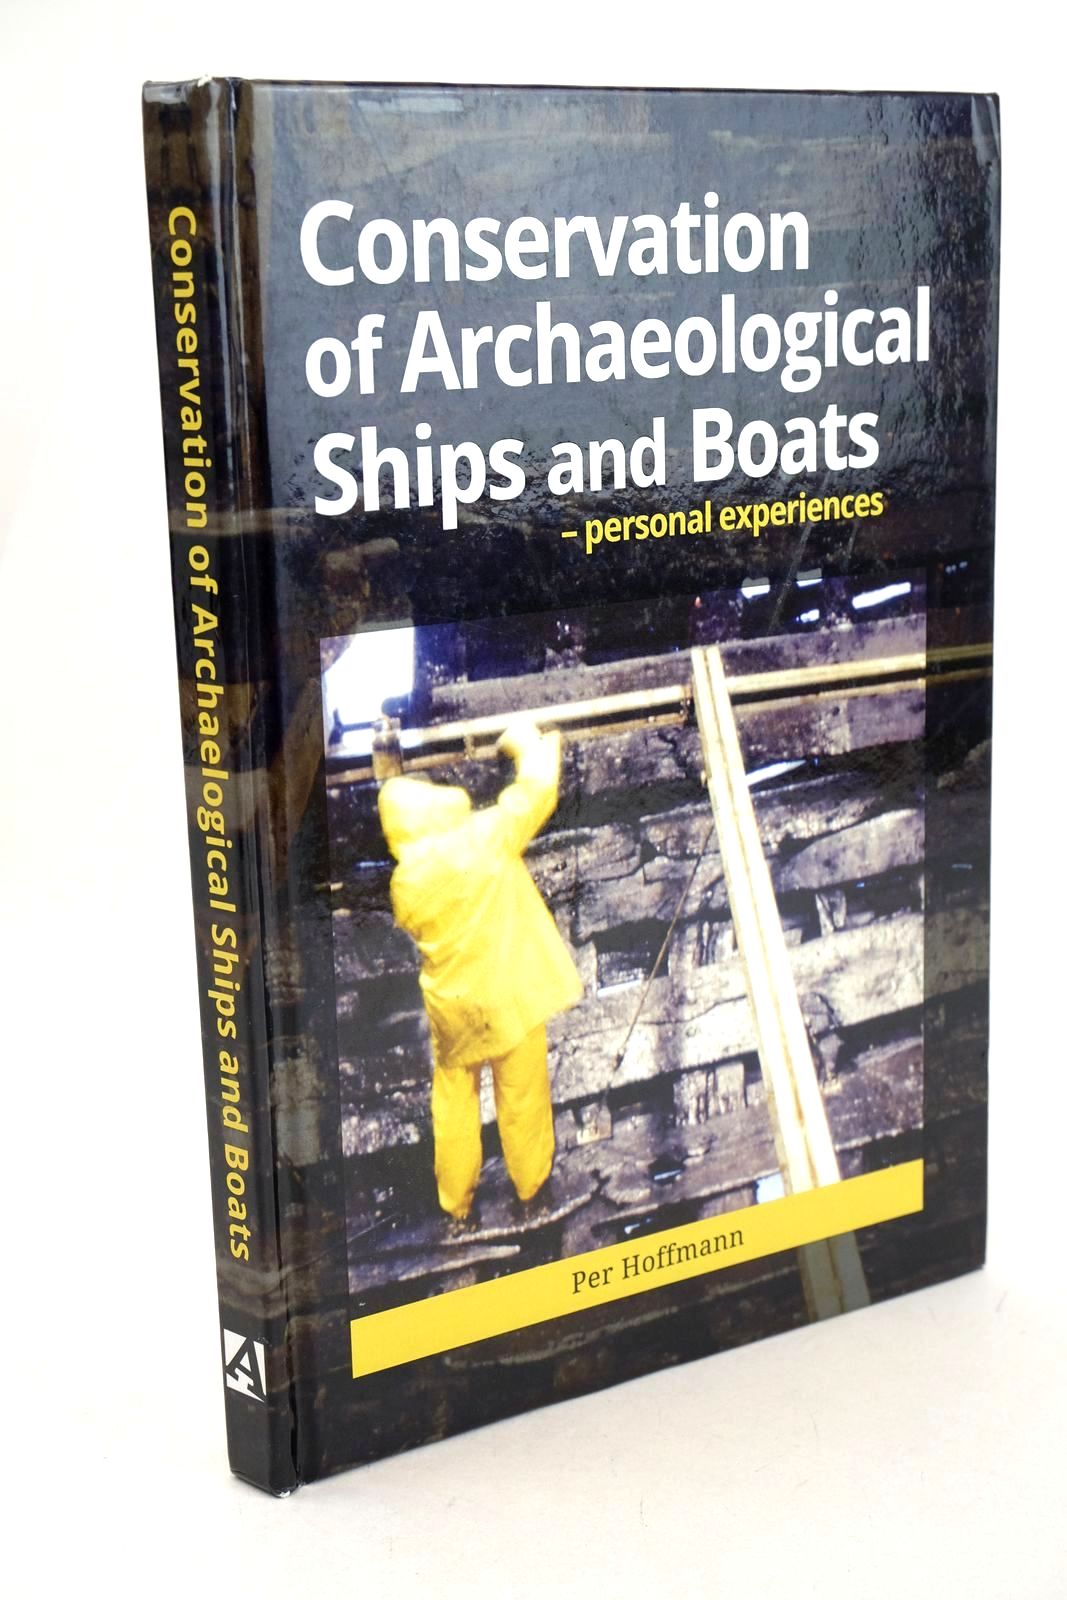 Photo of CONSERVATION OR ARCHAEOLOGICAL SHIPS AND BOATS - PERSONAL EXPERIENCES written by Hoffmann, Per published by Archetype Publications (STOCK CODE: 1327099)  for sale by Stella & Rose's Books